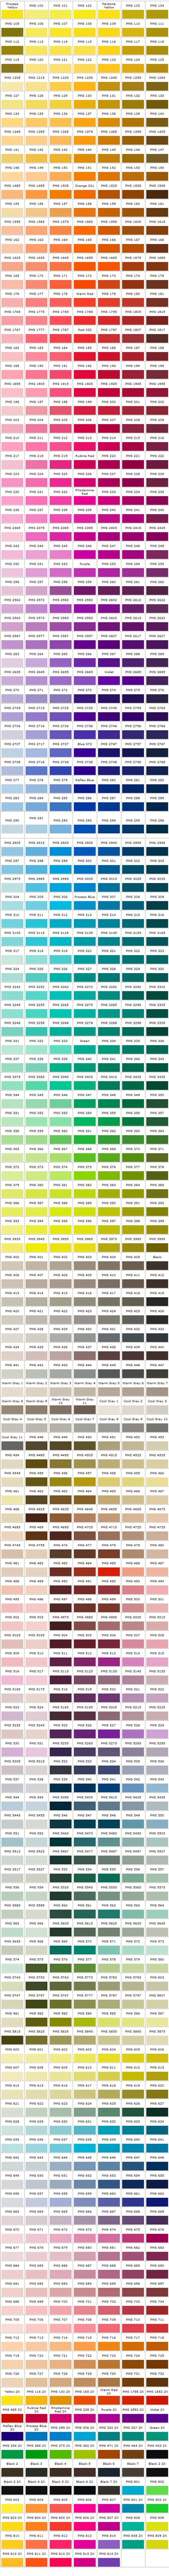 Pantone Color Reference Chart Reference Chart Color Pms Colour